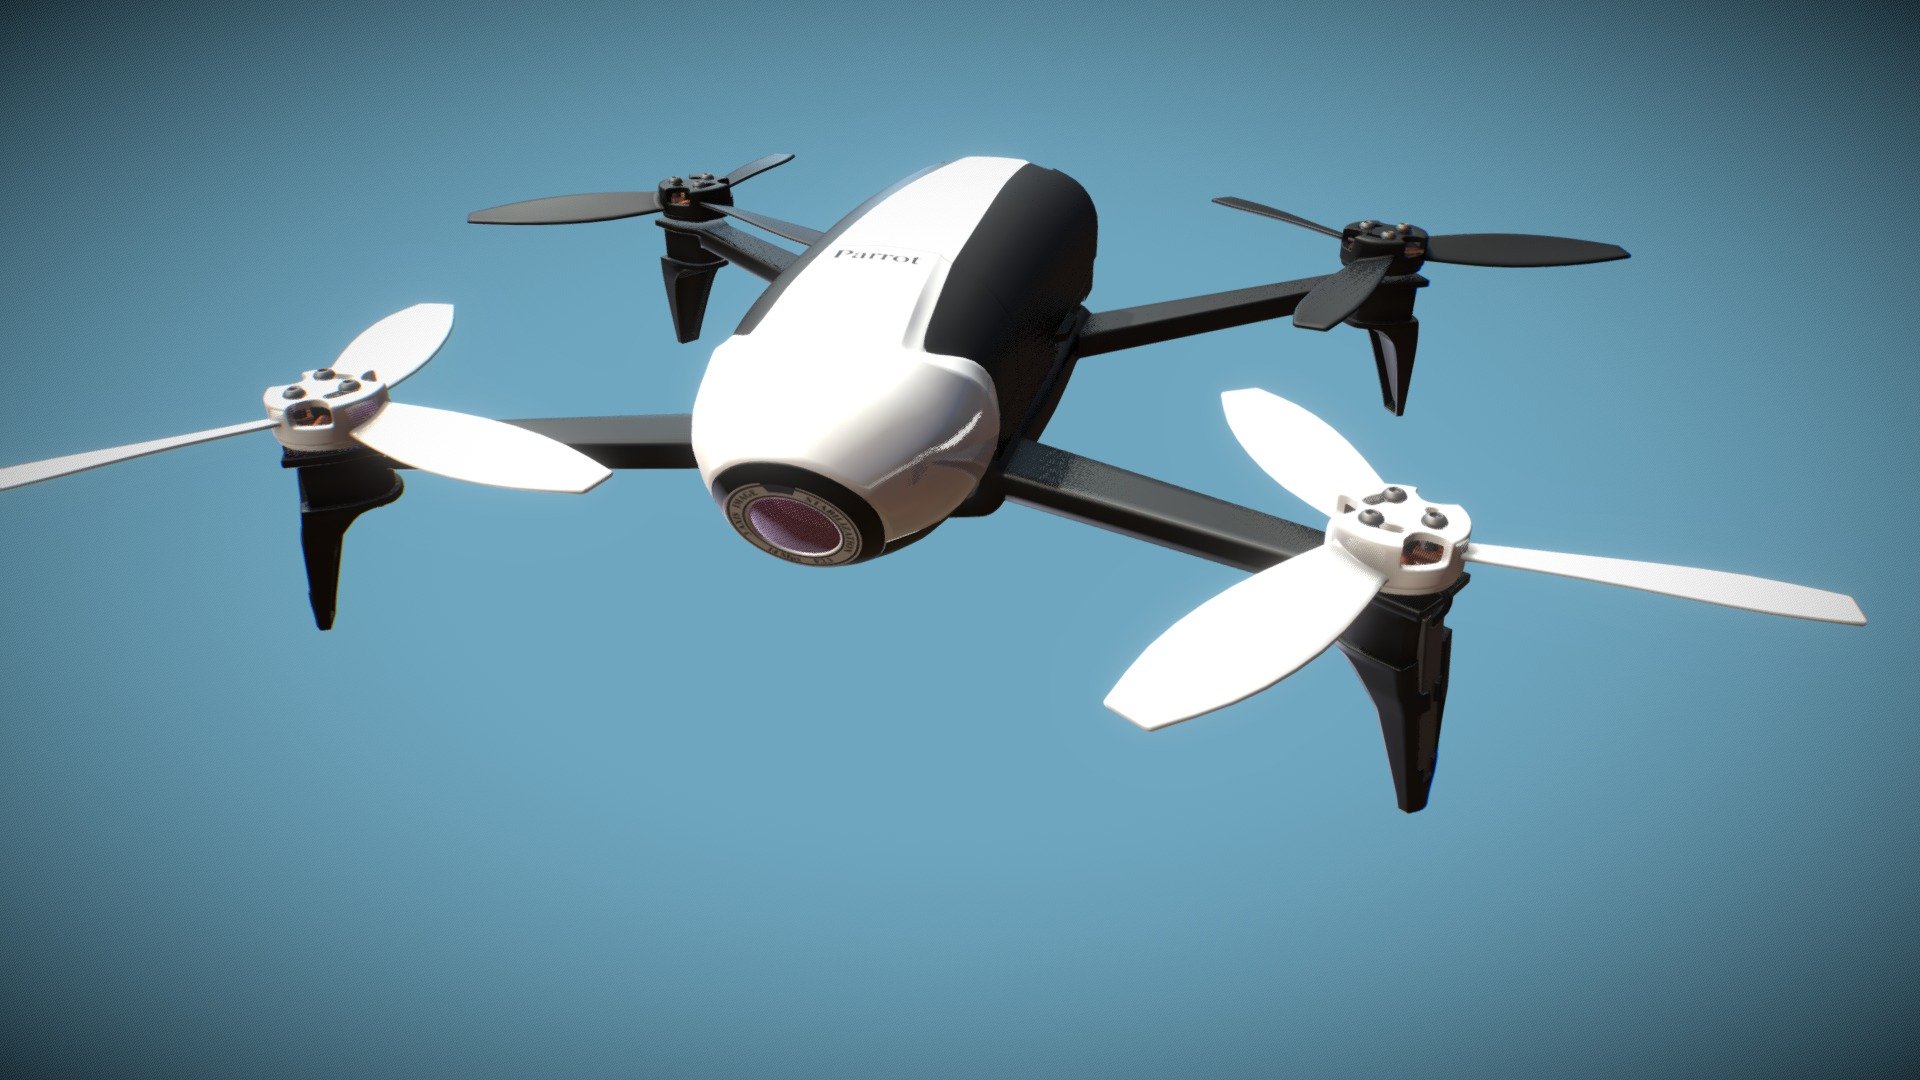 Great Hight Detailed 3d model of PARROT BEBOP 2

The lightweight, compact HD video drone Resulting from two years of design, the Parrot Bebop 2 is your ideal flight companion.
Weighing 500 g and offering 25 minutes of autonomous flight time, this leisure drone is cutting-edge. 
Its high-performance specs mean it can fly, film, and take photographs brilliantly both indoors and outdoors.
INFO: - Origionally created with 3ds Max 2014 
- This model contains separate 5 objects -
This model contains 72 324 polygons witn TurboSmooth OFF - 
This model contains 551 238 poligons with TurboSmooth 1 iteration 
- real world size (system units - cm) - 
This model is completely ready for use visualization in 3ds max. 
- All previews rendered 3ds max Vray realistic rendering.
- Texture: Parrot_texture 2048x2048 PNG - Parrot Bebop v2 3D model - Buy Royalty Free 3D model by omg3d 3d model